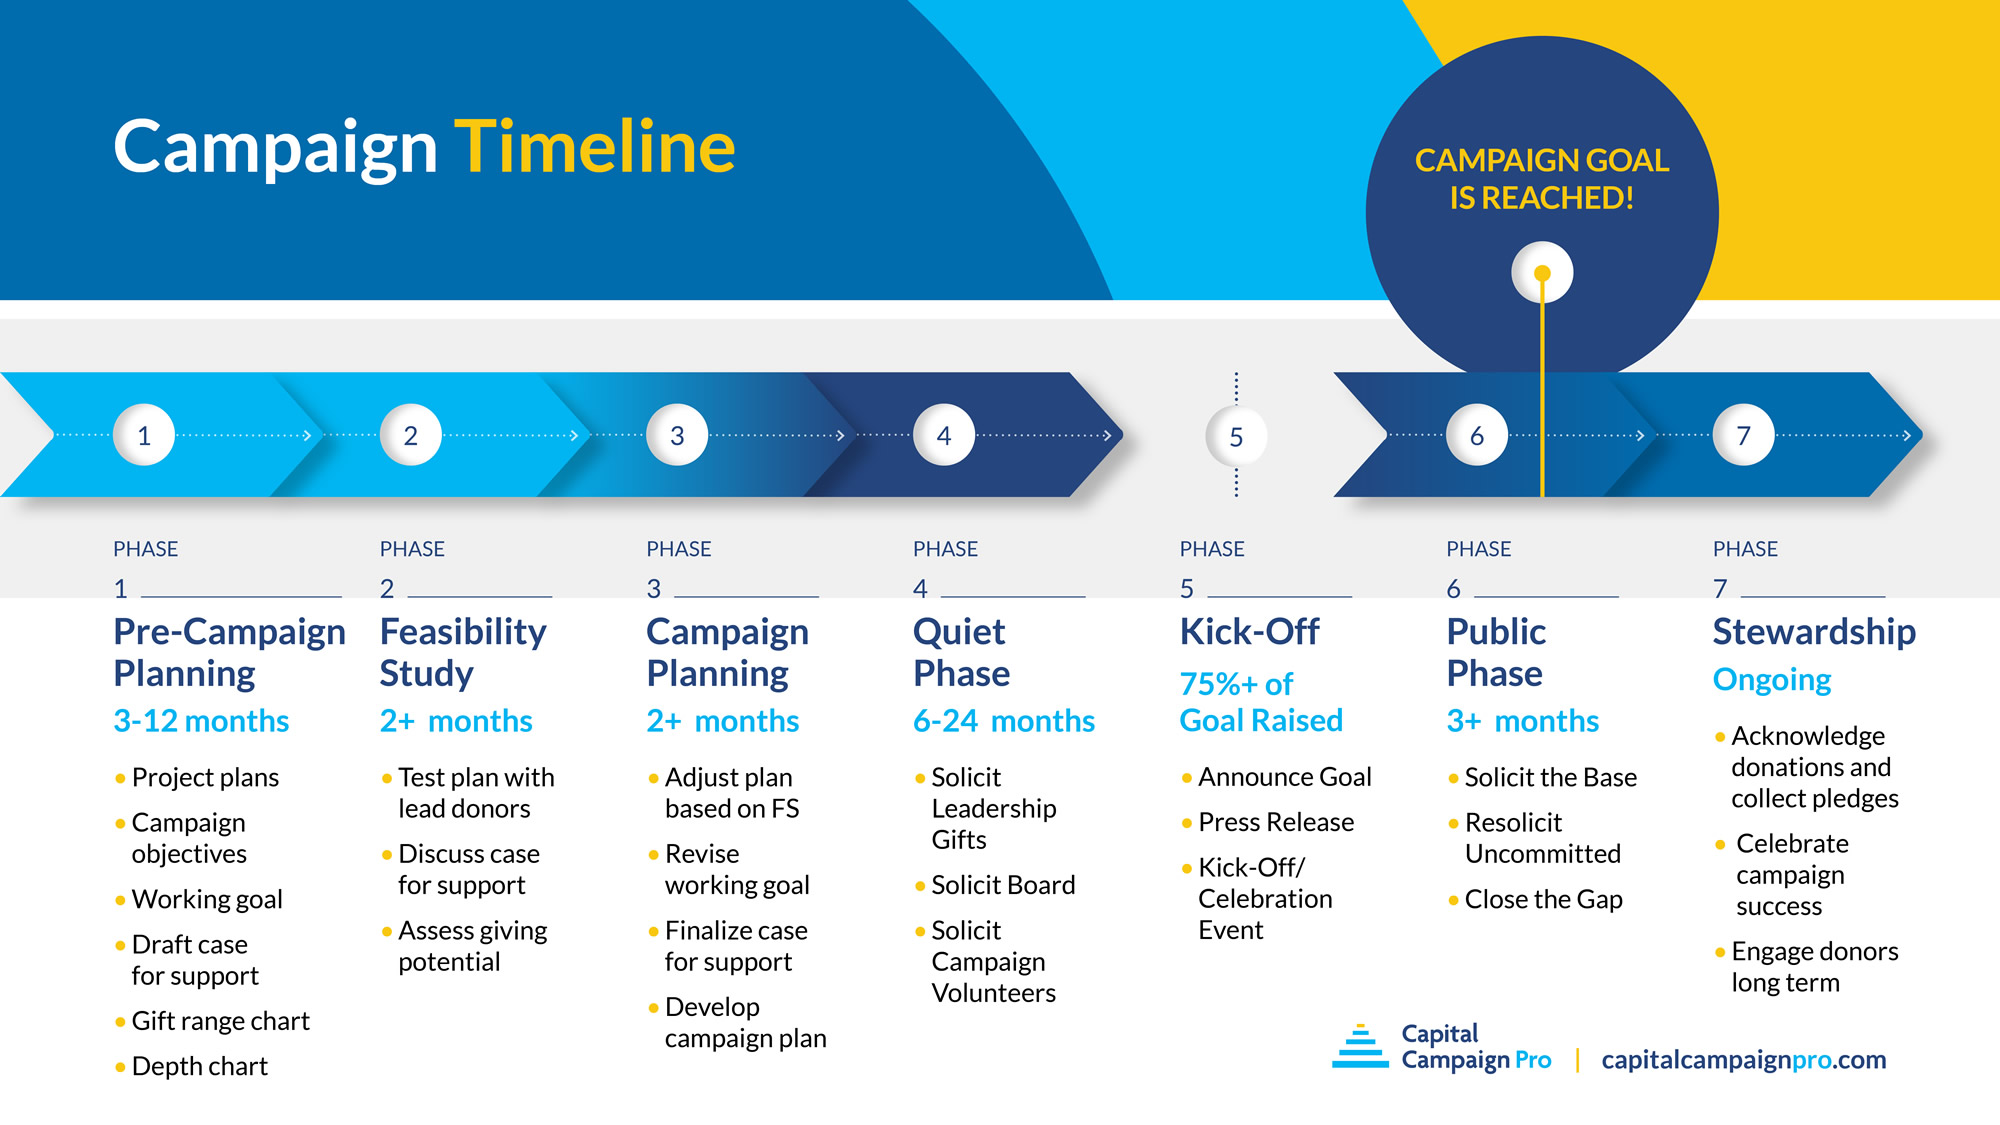 This timeline shows where the Quiet Phase (phase 4) fits into your capital campaign.